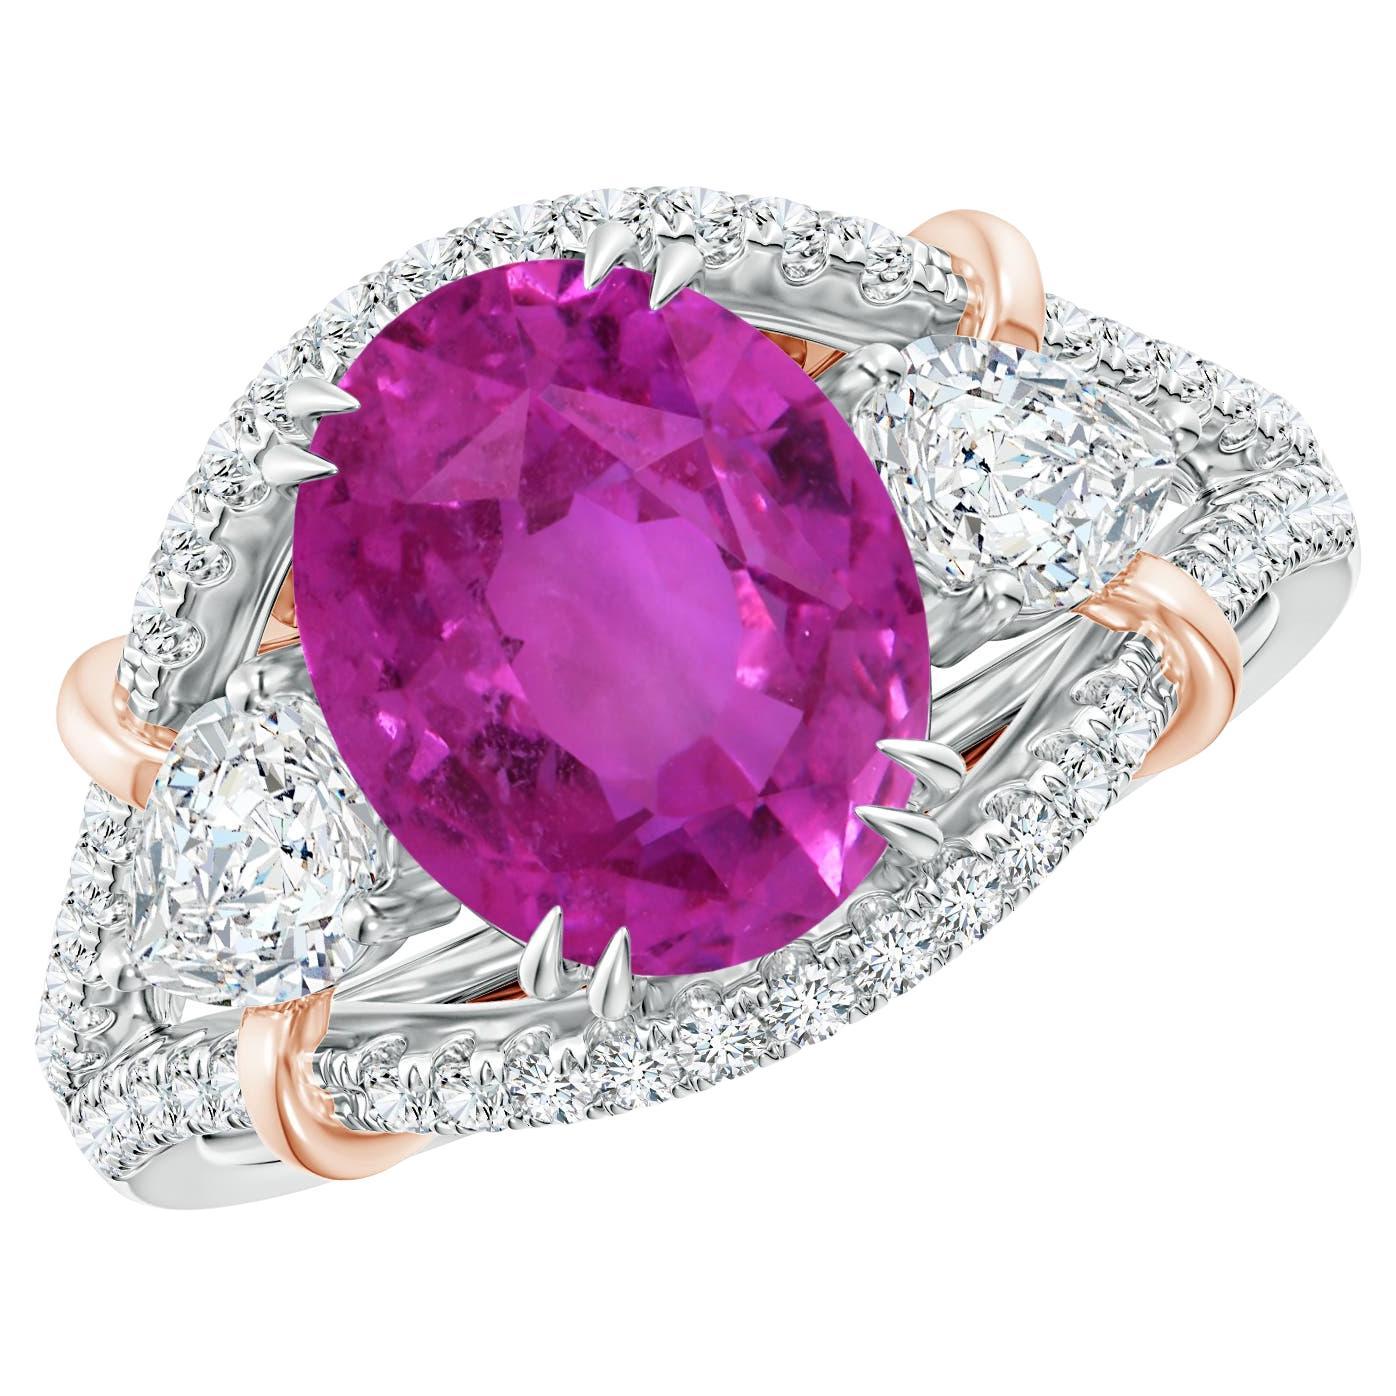 For Sale:  Angara GIA Certified Natural Pink Sapphire Ring in Rose Gold with Diamonds